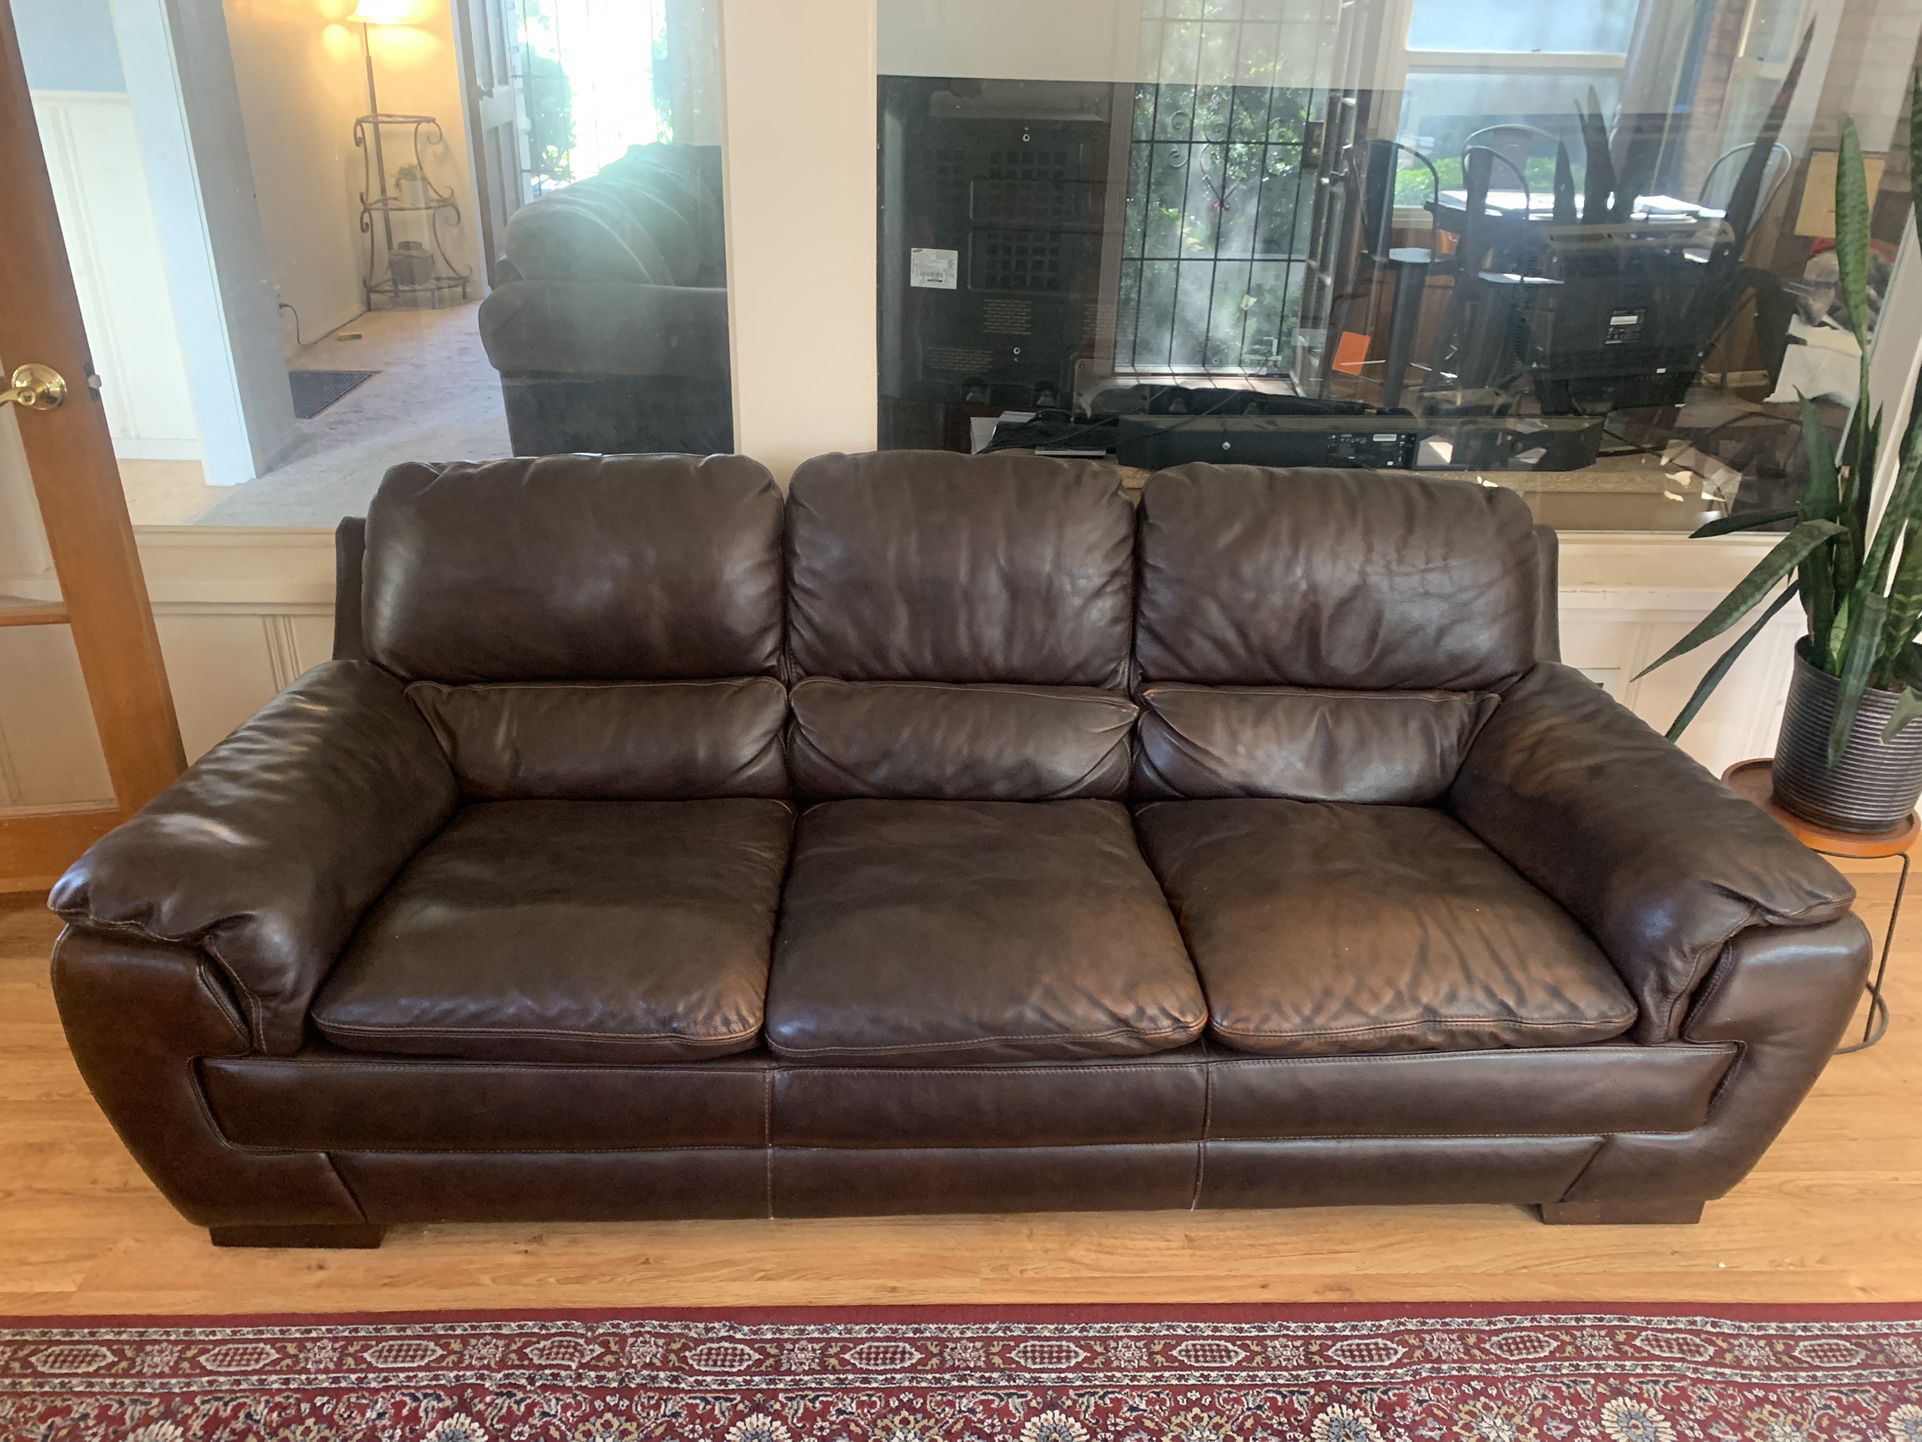 Brown Leather couch